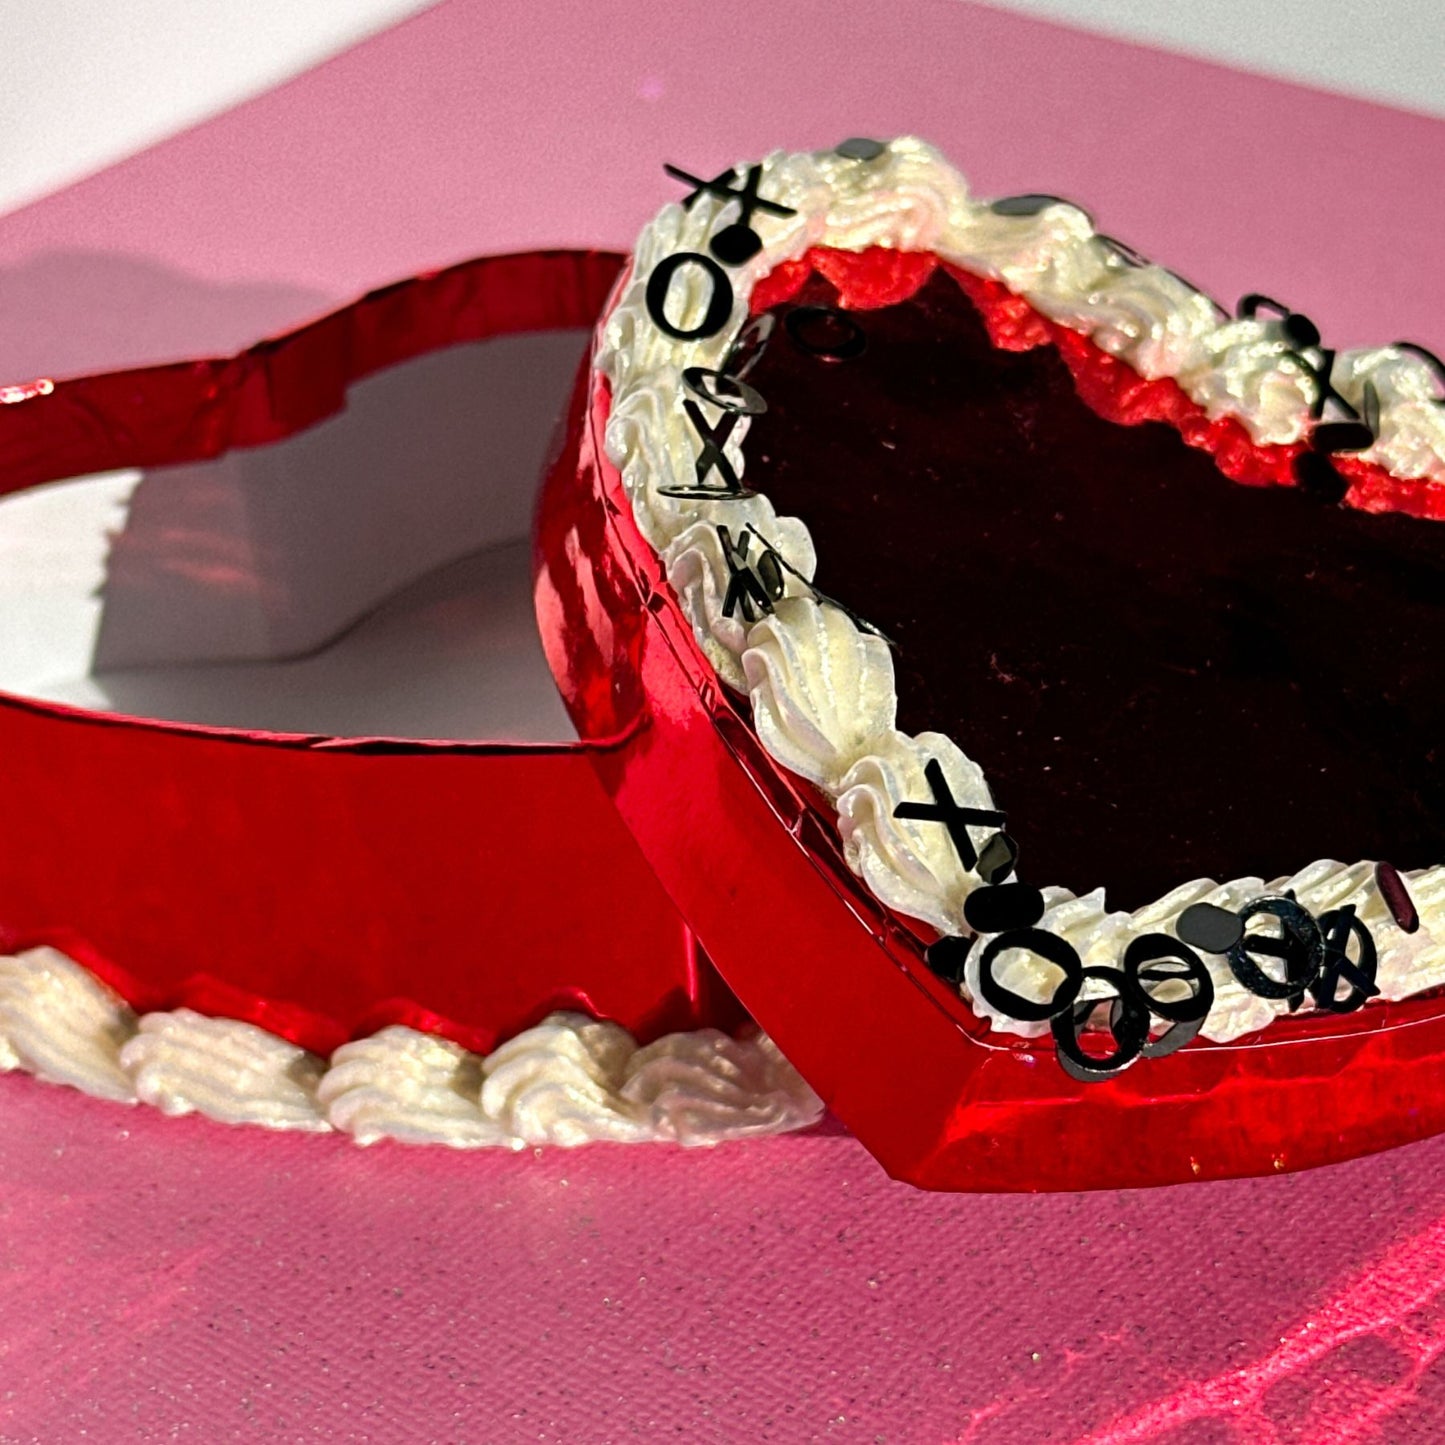 3D Painted Cake - Heart Box Red Metallic With Pearl "Frosting" and Black XO Glitter